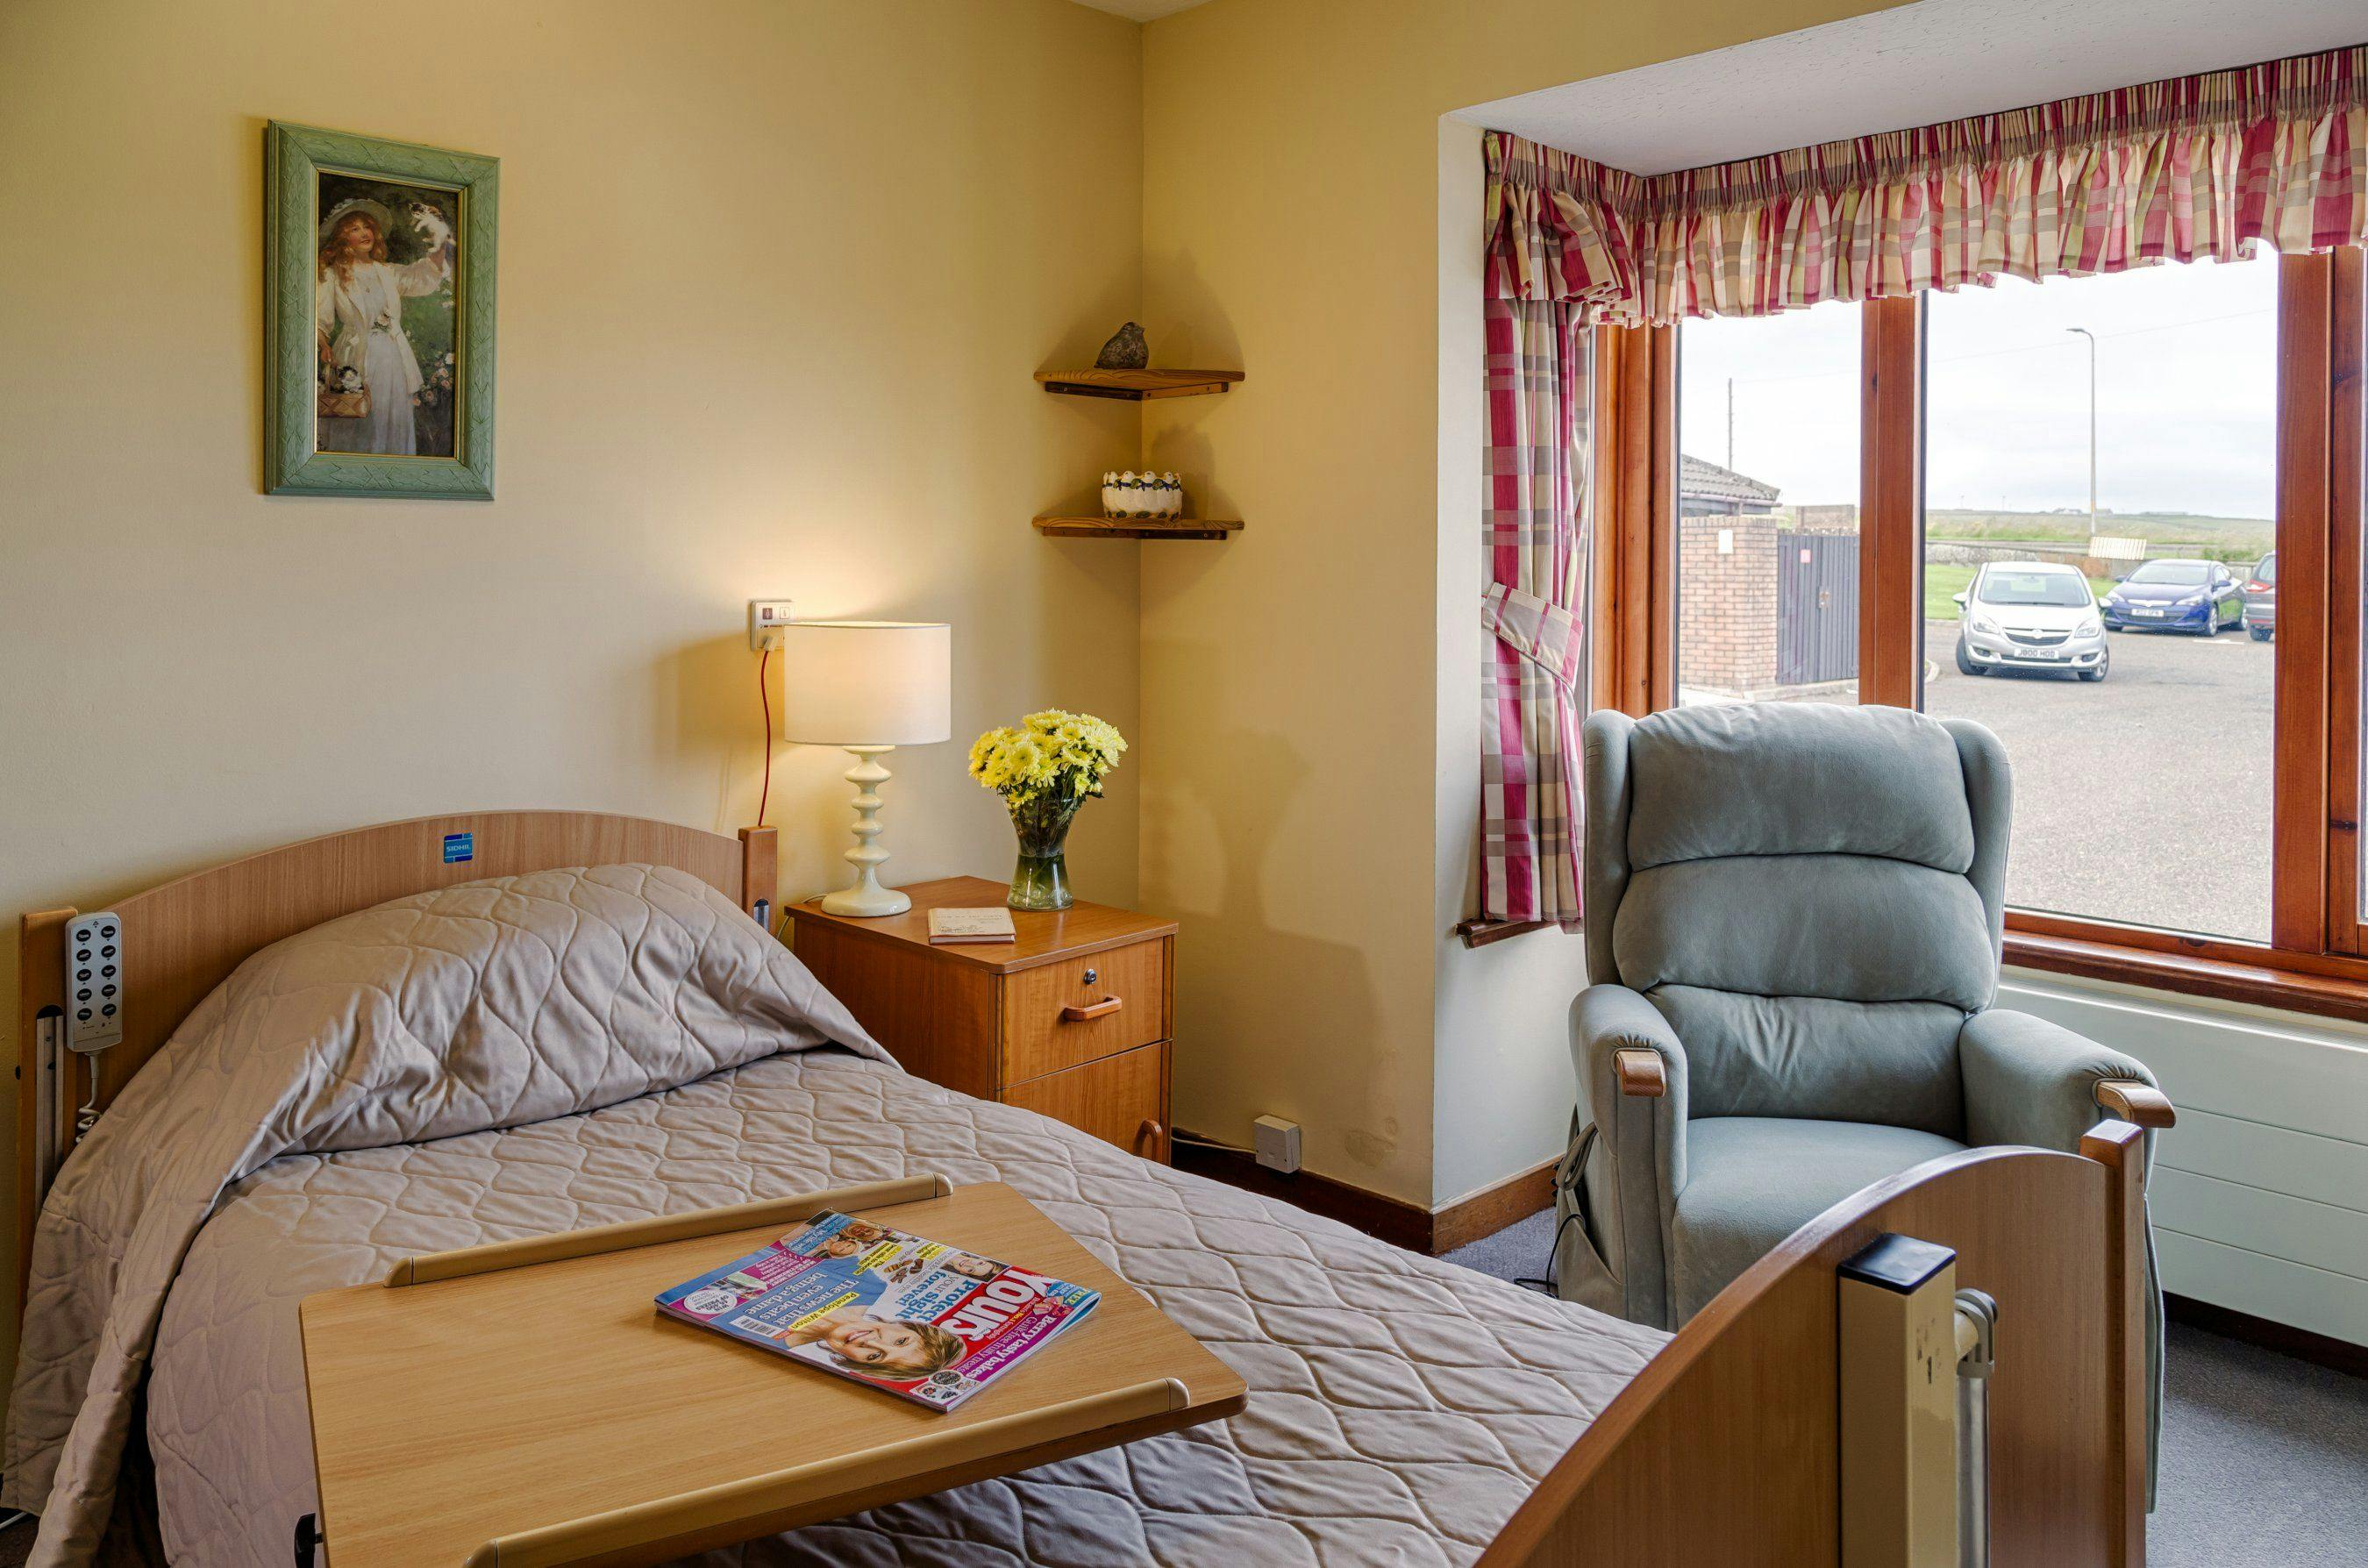 Bedroom at Pentland View Care Home in Thurso, Highland